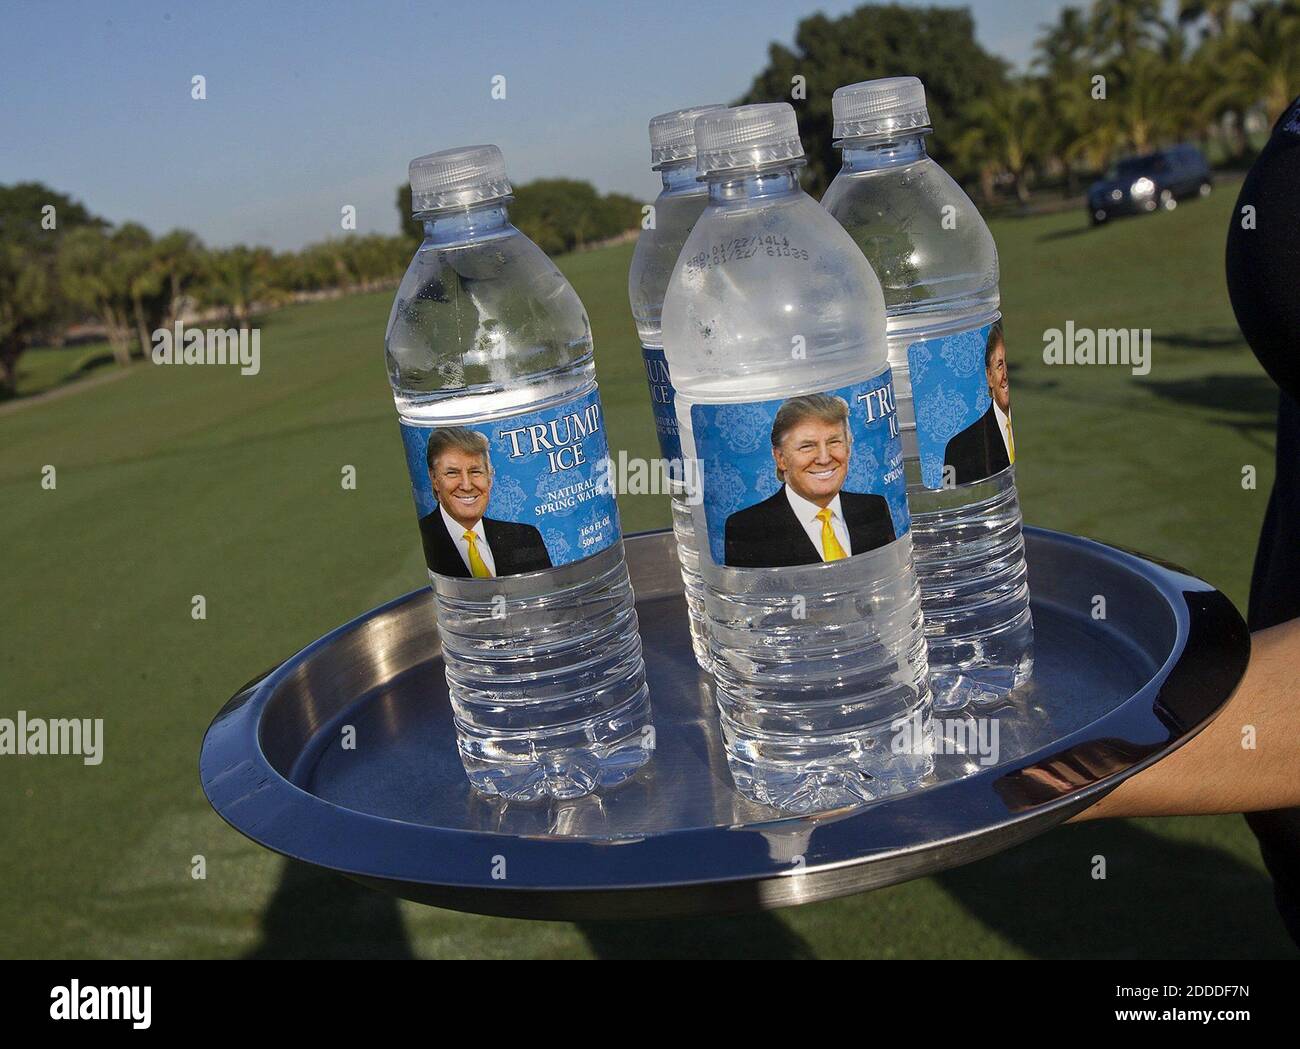 NO FILM, NO VIDEO, NO TV, NO DOCUMENTARY - A waitress passes out Trump water bottles at Trump National Doral, in Doral, FL, USA on February 6, 2014. Photo by David Walters/Miami Herald/MCT/ABACAPRESS.COM Stock Photo